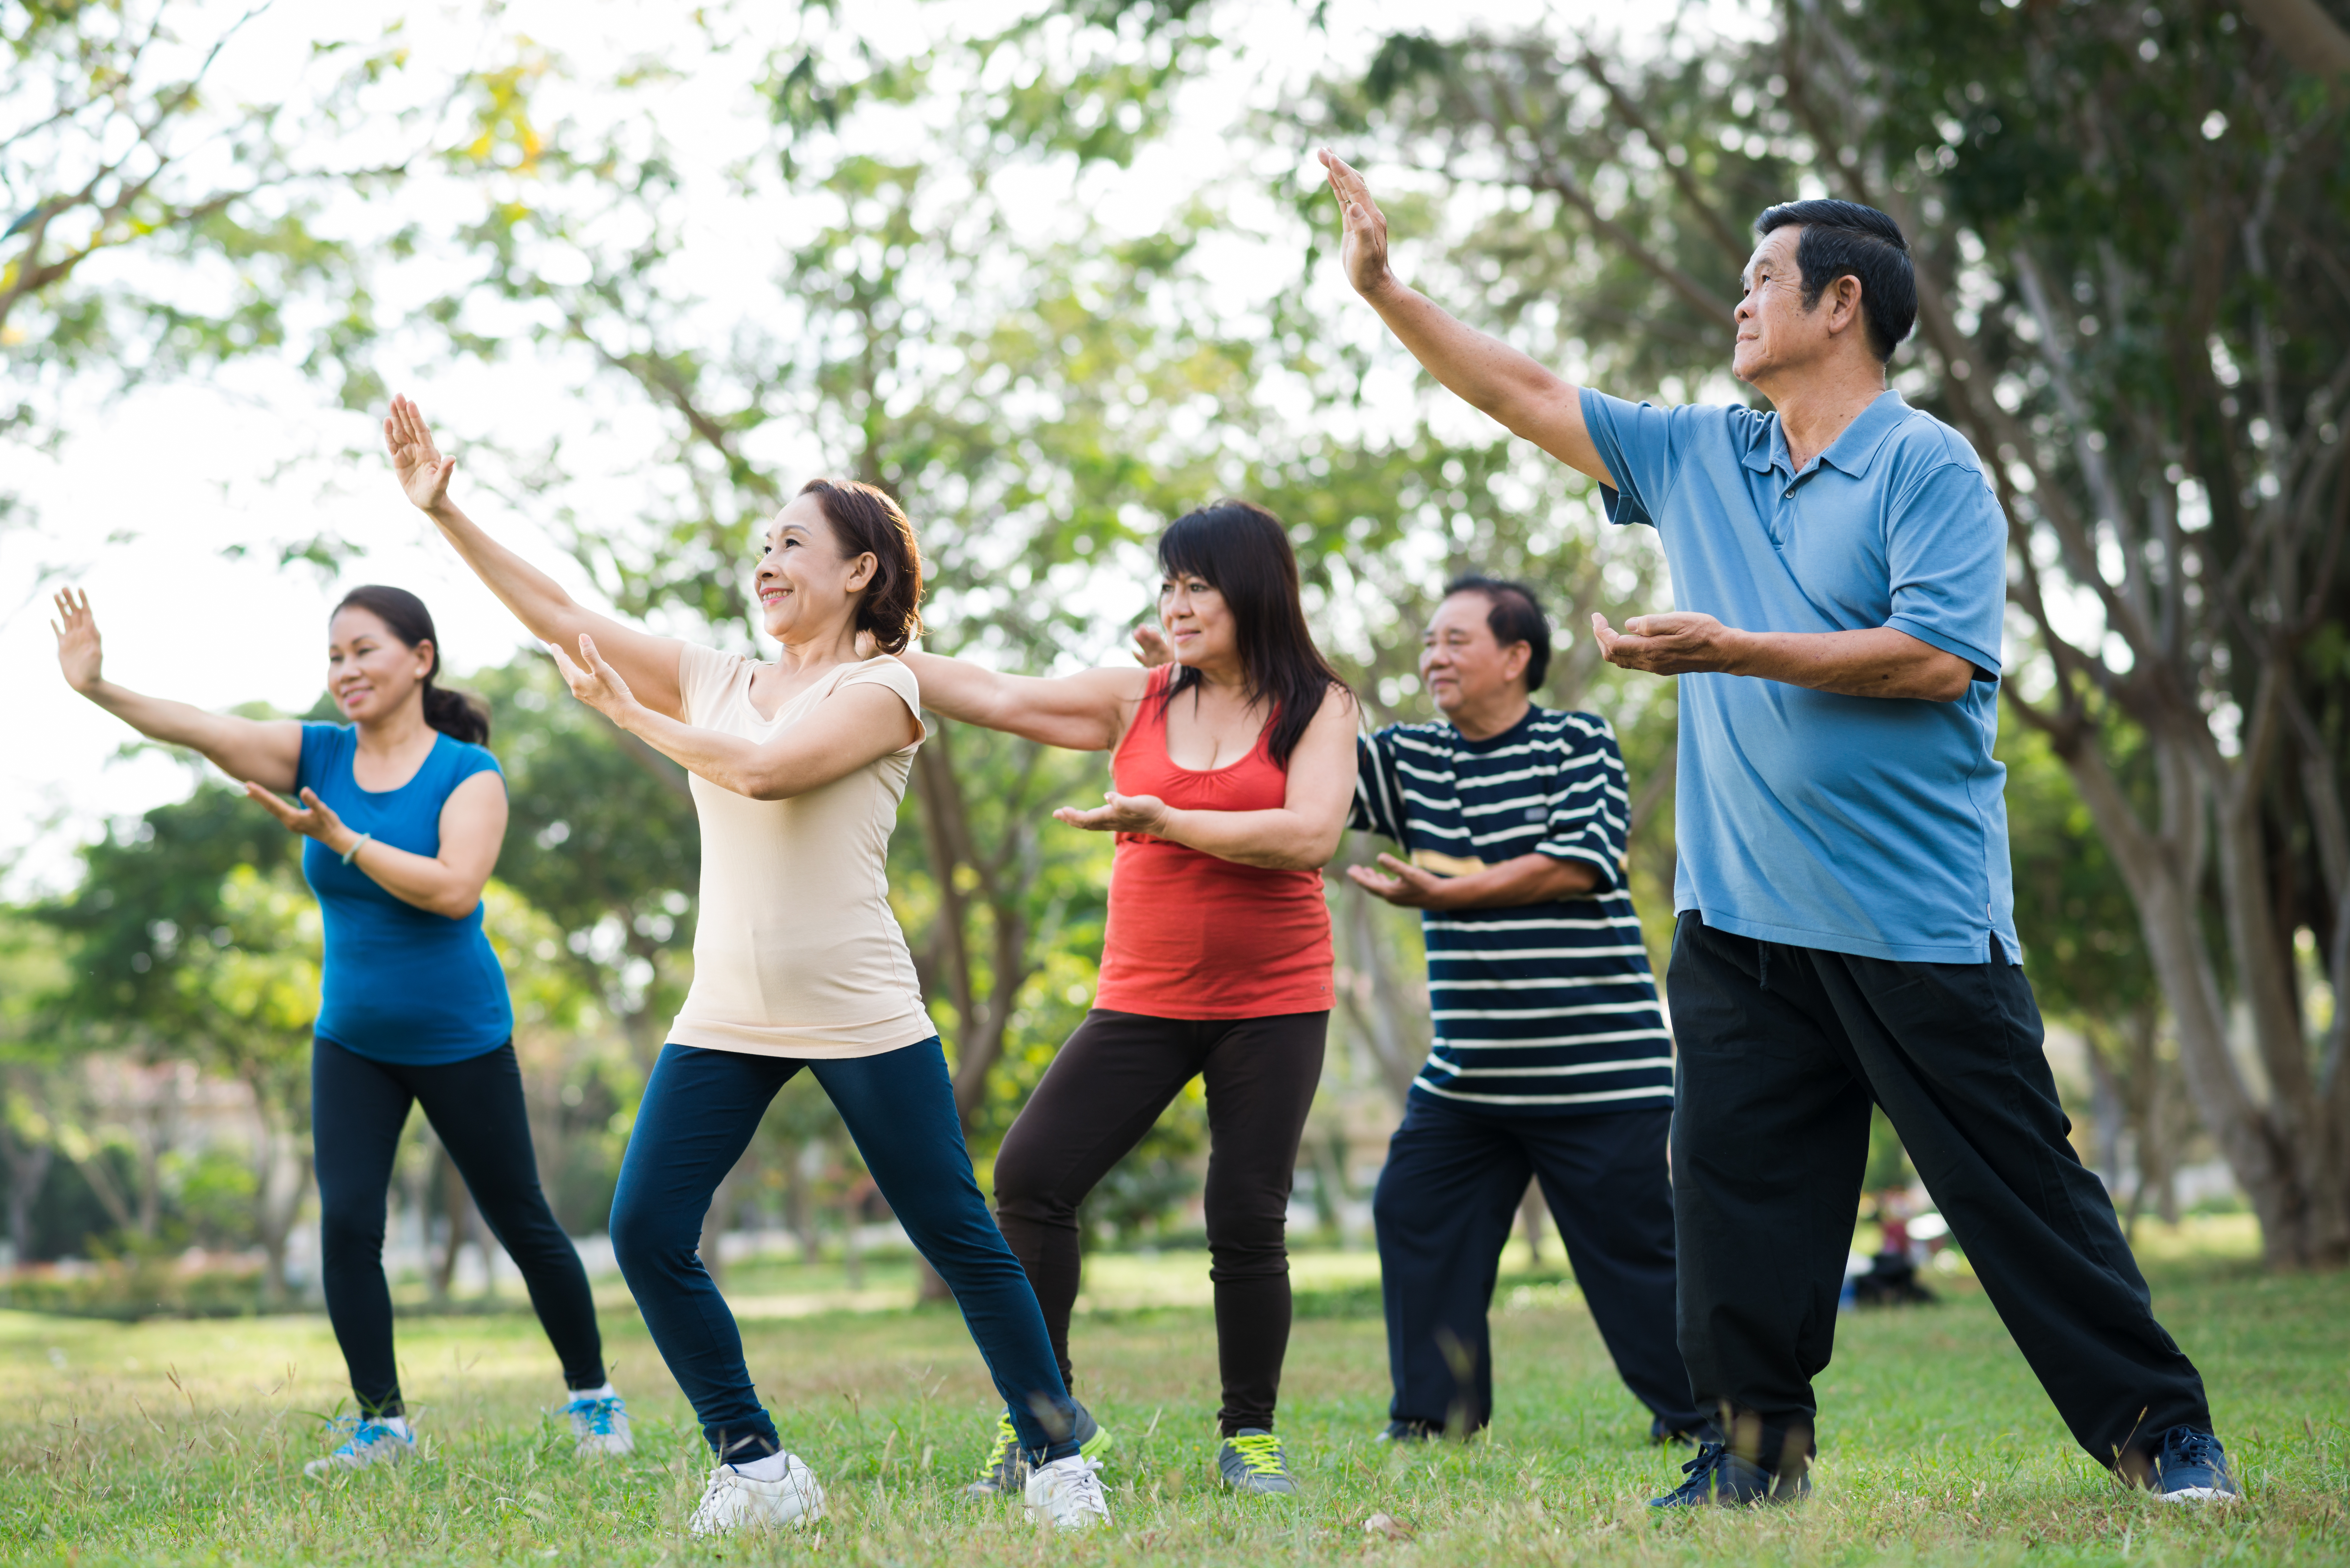 Help a Loved One Get More Active: Quick tips 